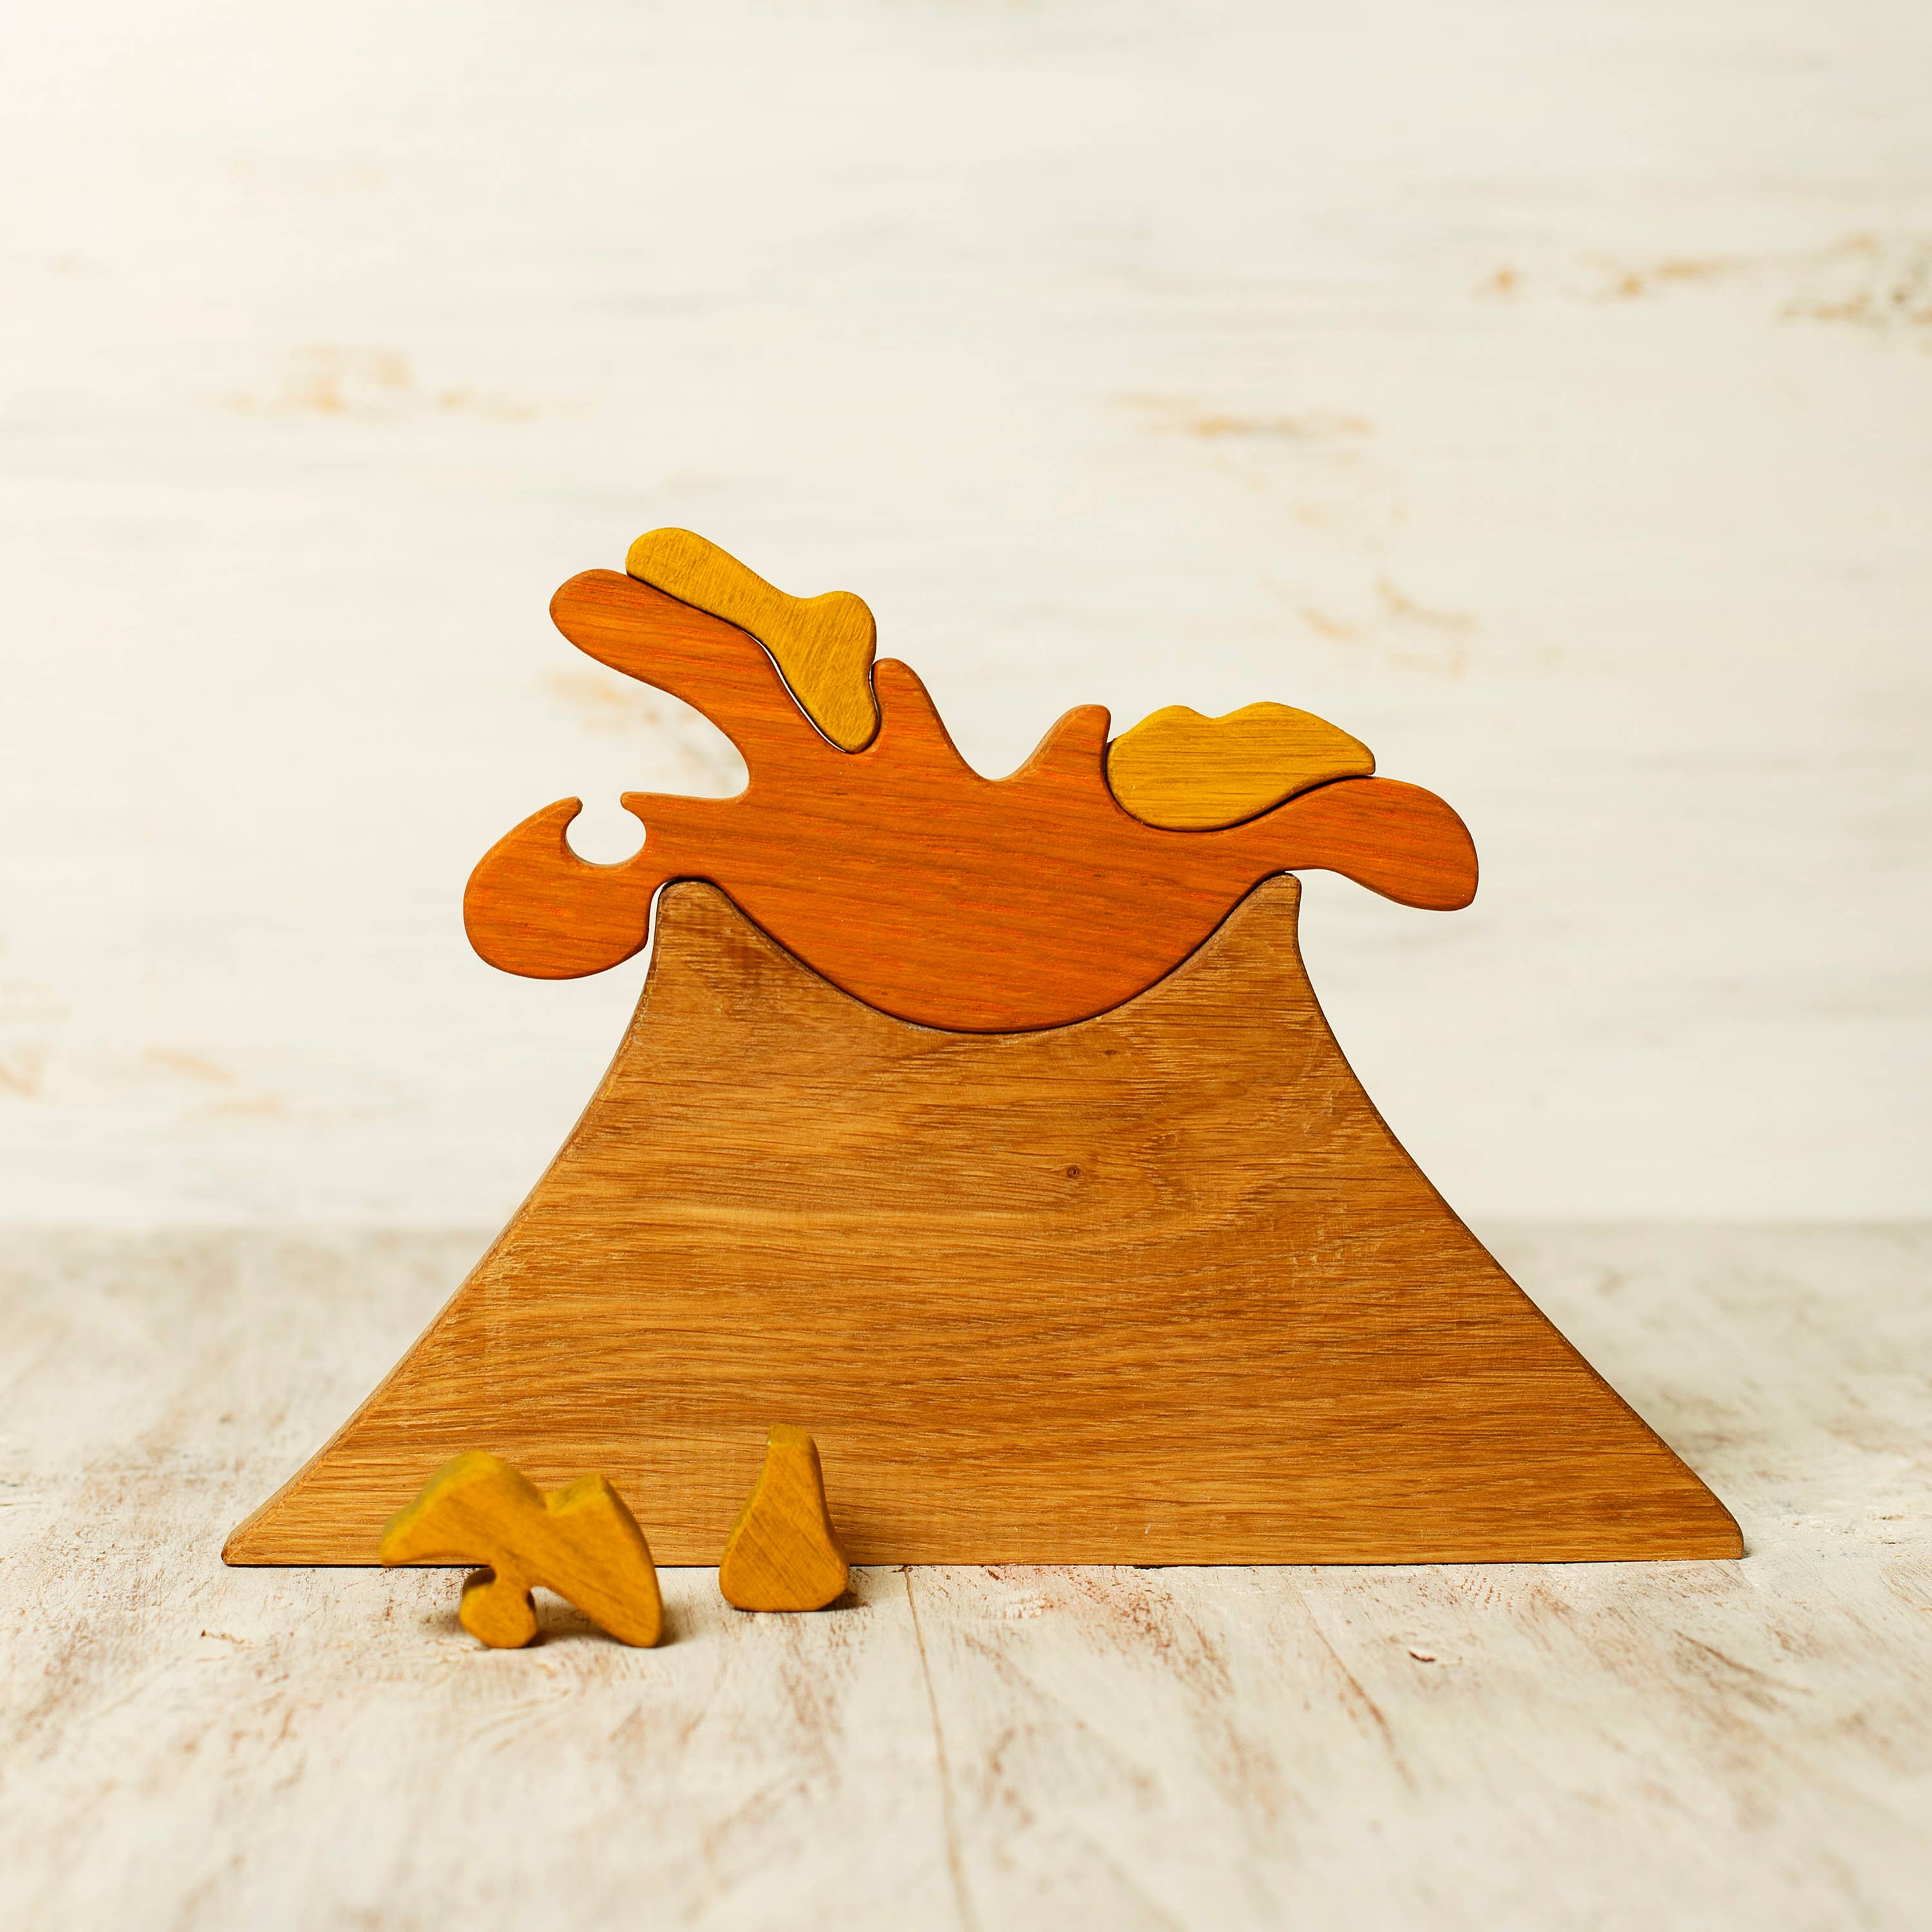 Volcano Wooden Puzzle toy Dinosaurs Playset